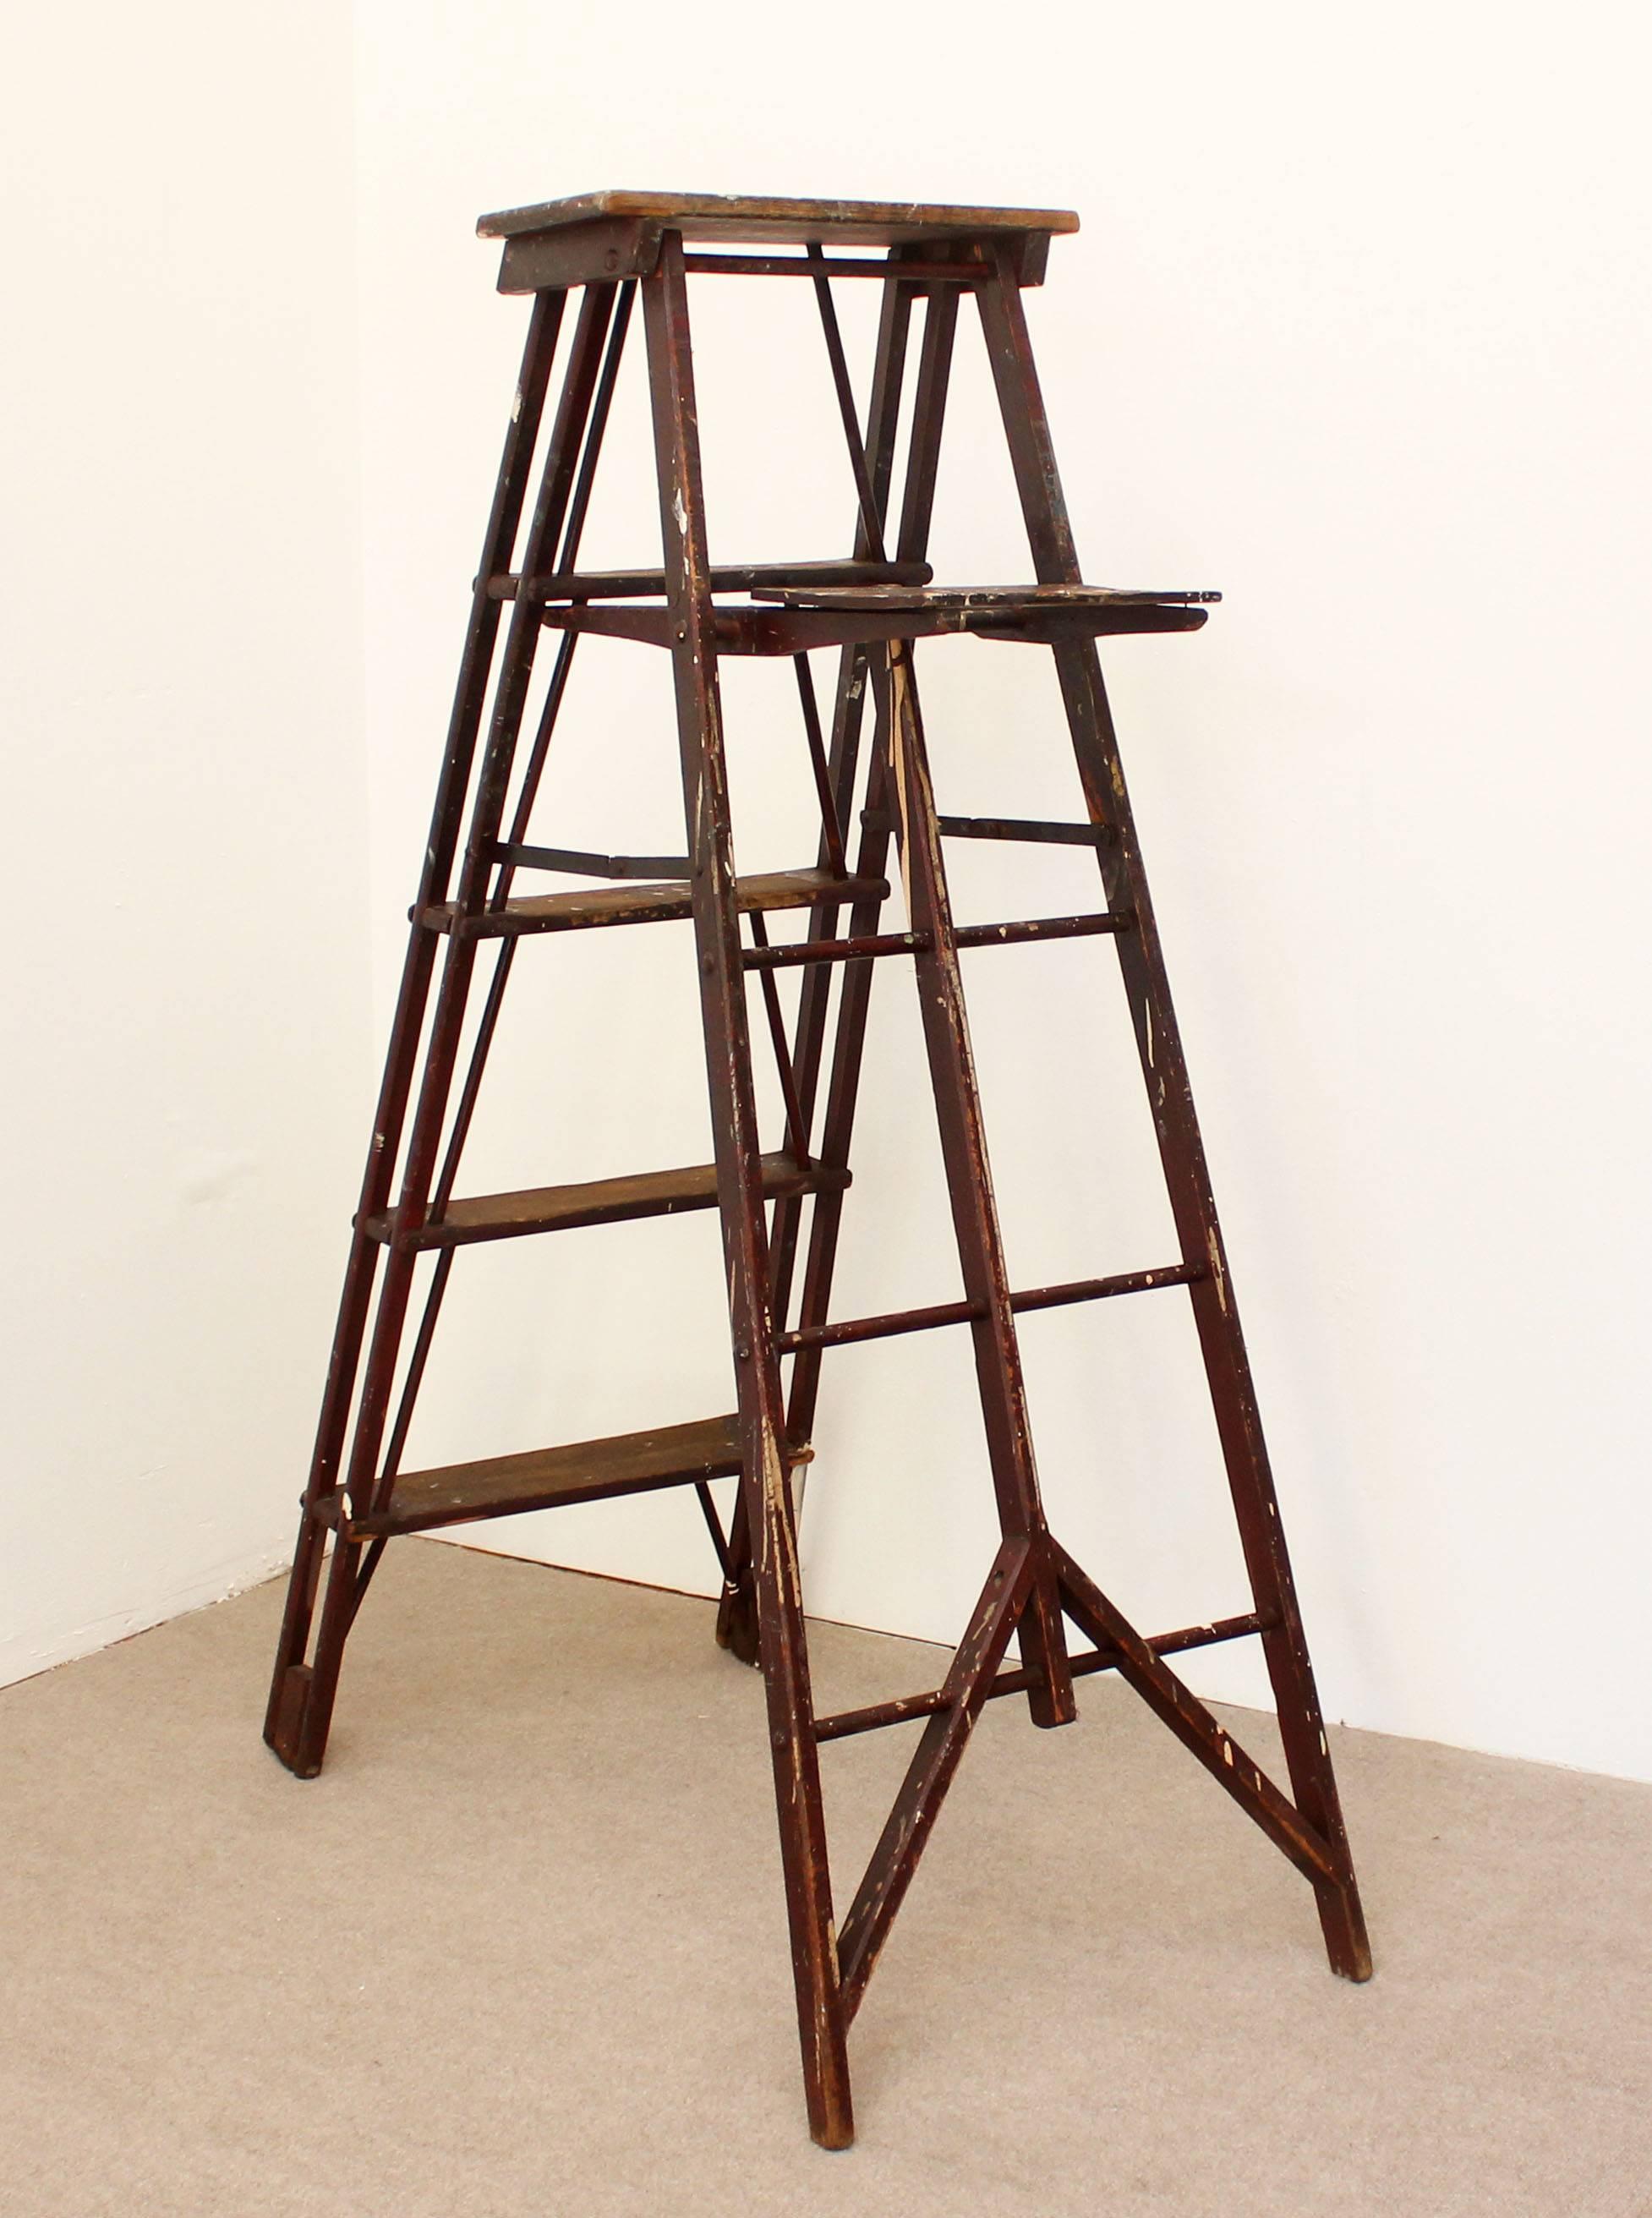 Vintage 1920s wood painter's ladder. Lots of character.